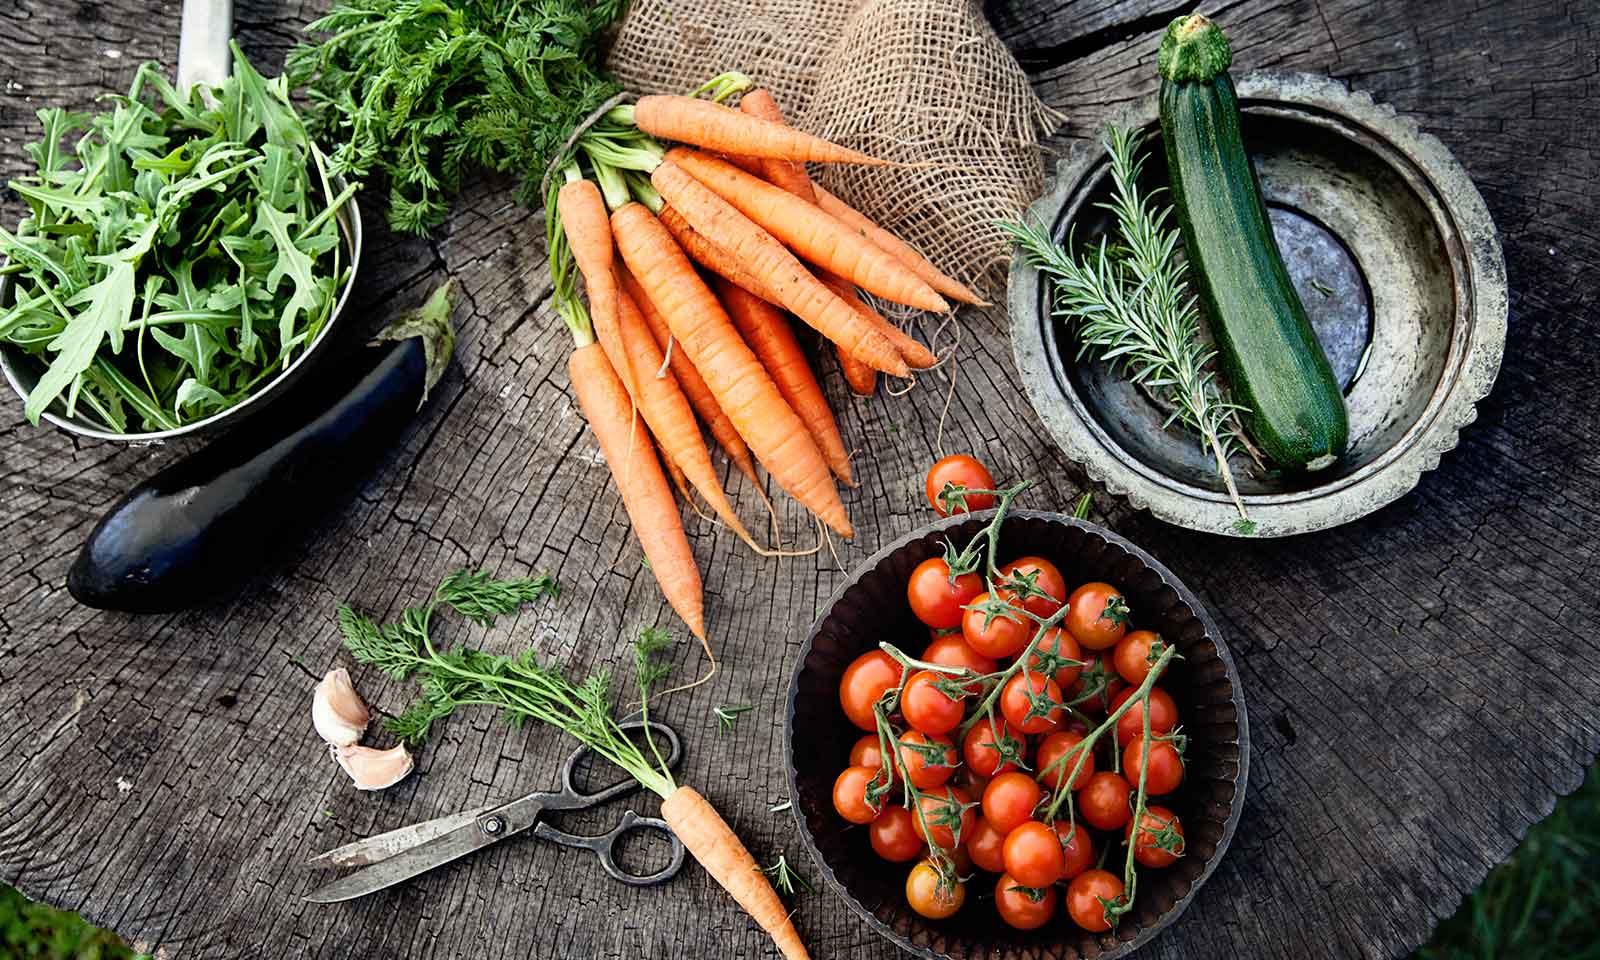 How To Get The Most Out Of Your Healthy Produce